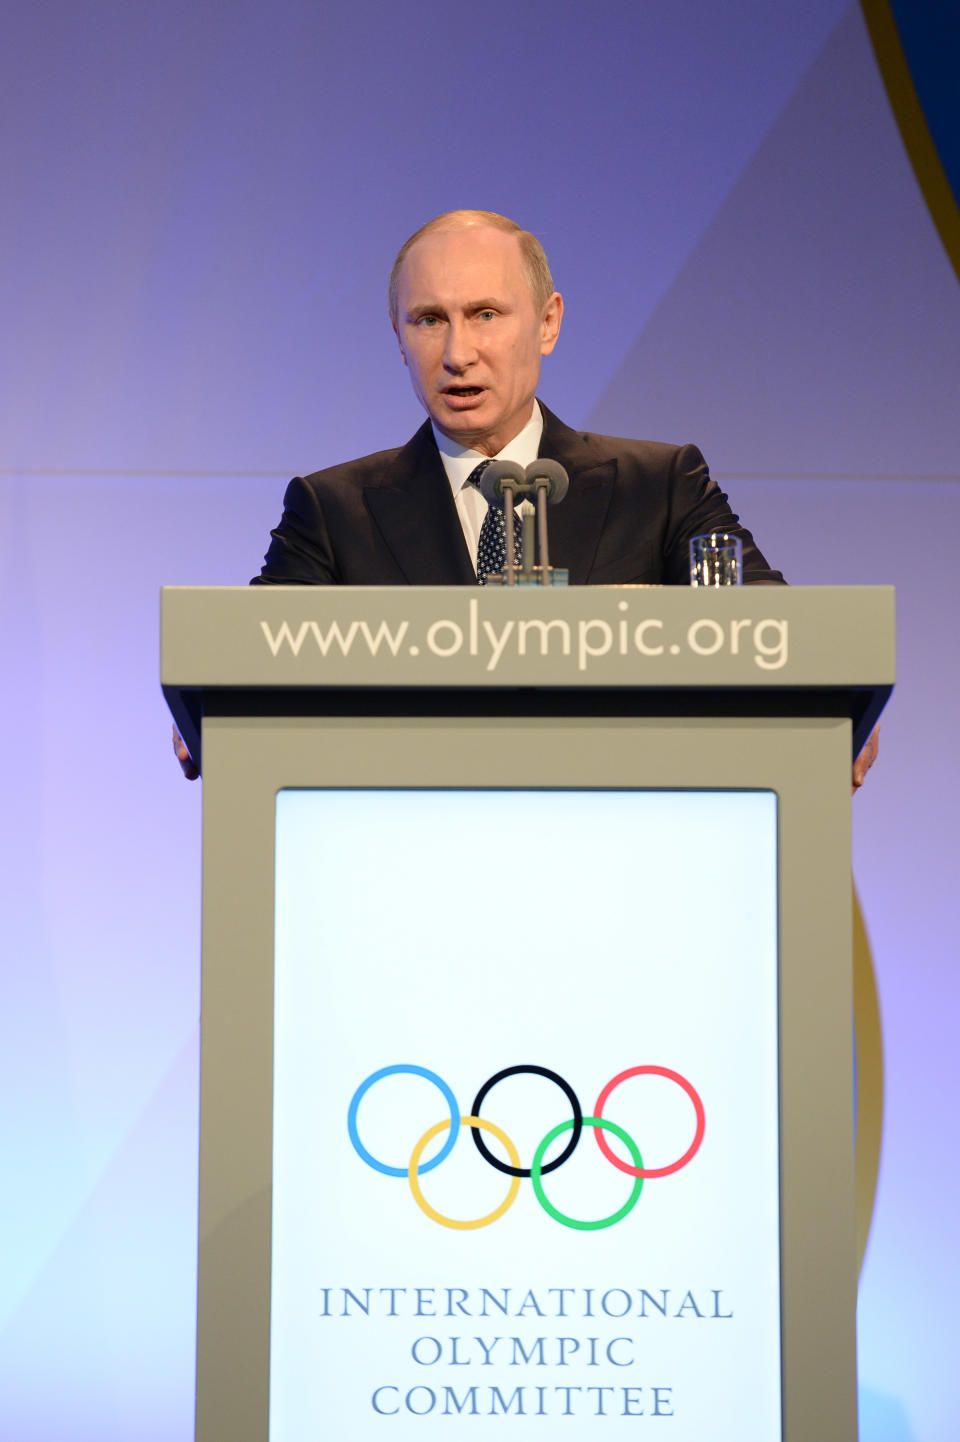 Russian President Vladimir Putin delivers his speech at the IOC President's Gala Dinner on the eve of the opening ceremony of the 2014 Winter Olympics, Thursday, Feb. 6, 2014, in Sochi, Russia. (AP Photo/Andrej Isakovic, Pool)